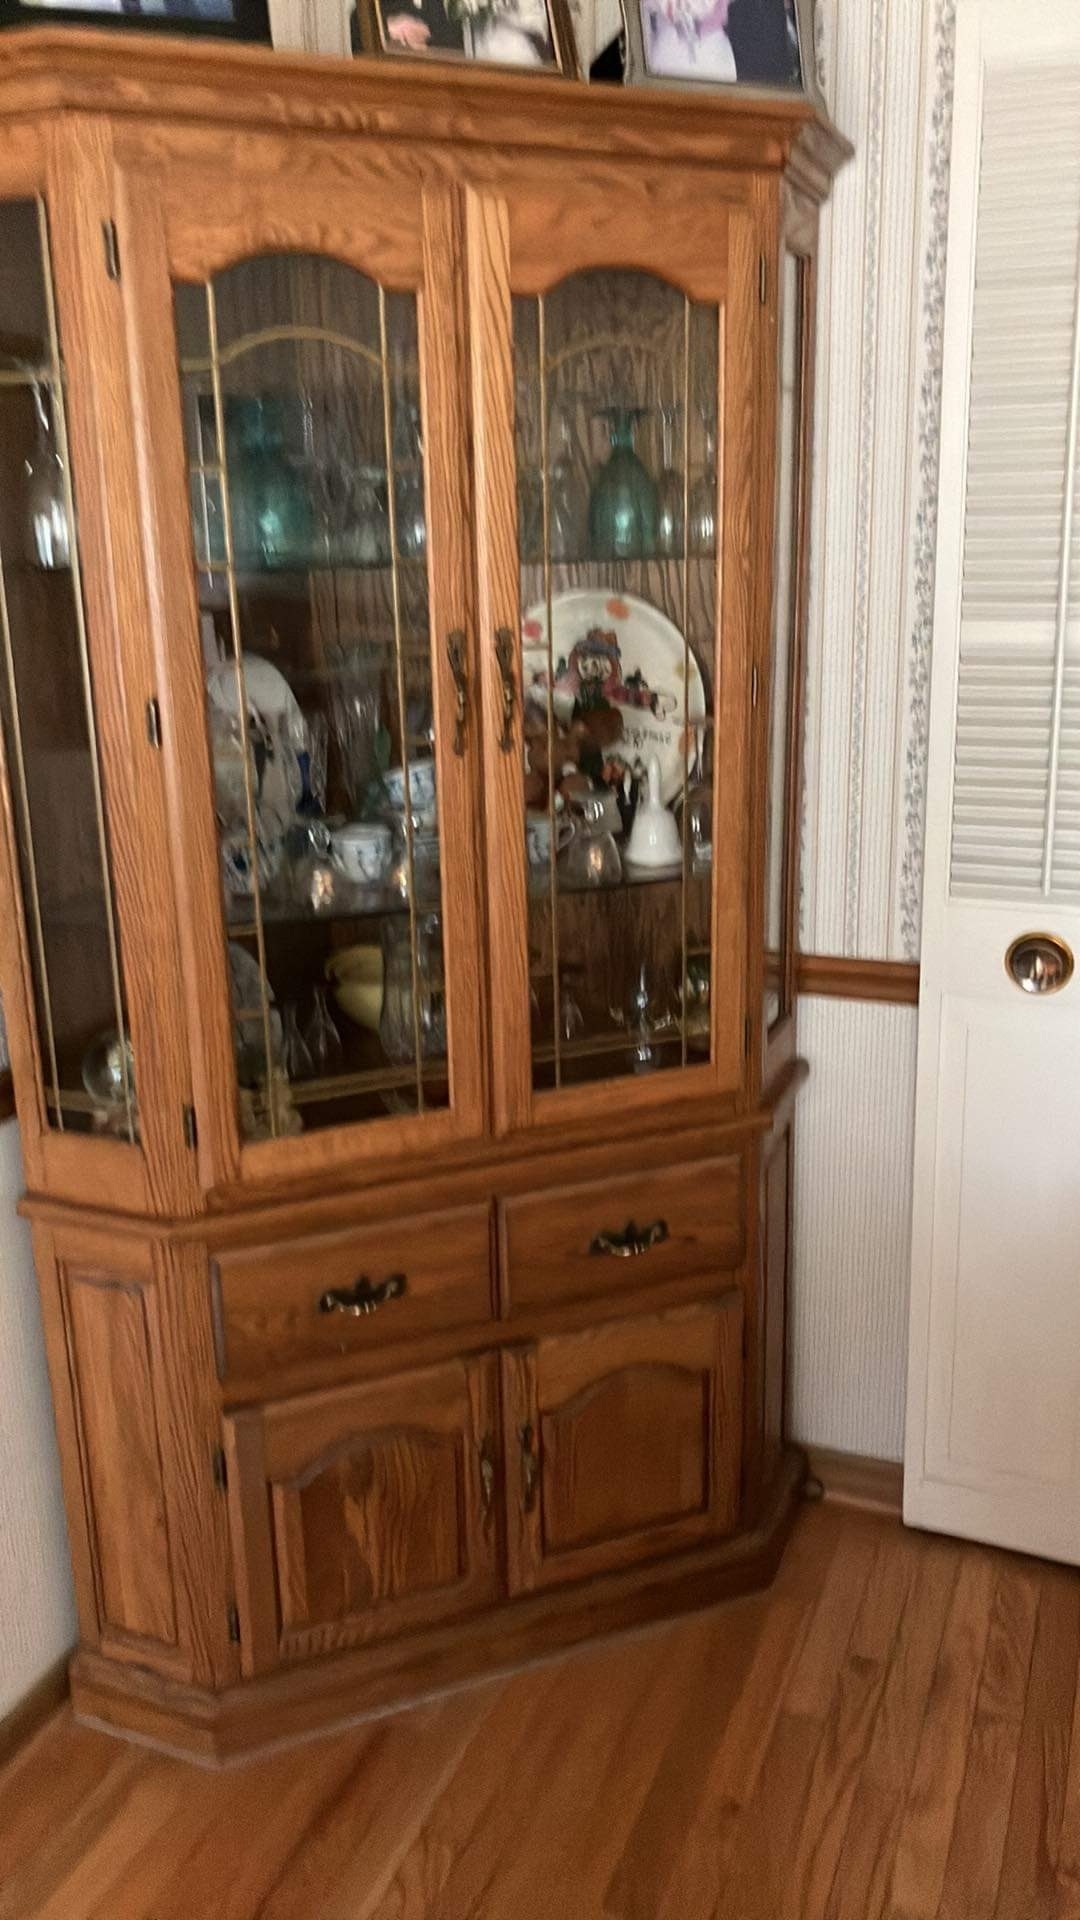 A large wooden cabinet with glass doors and containing glass figurines, glasses, and plates